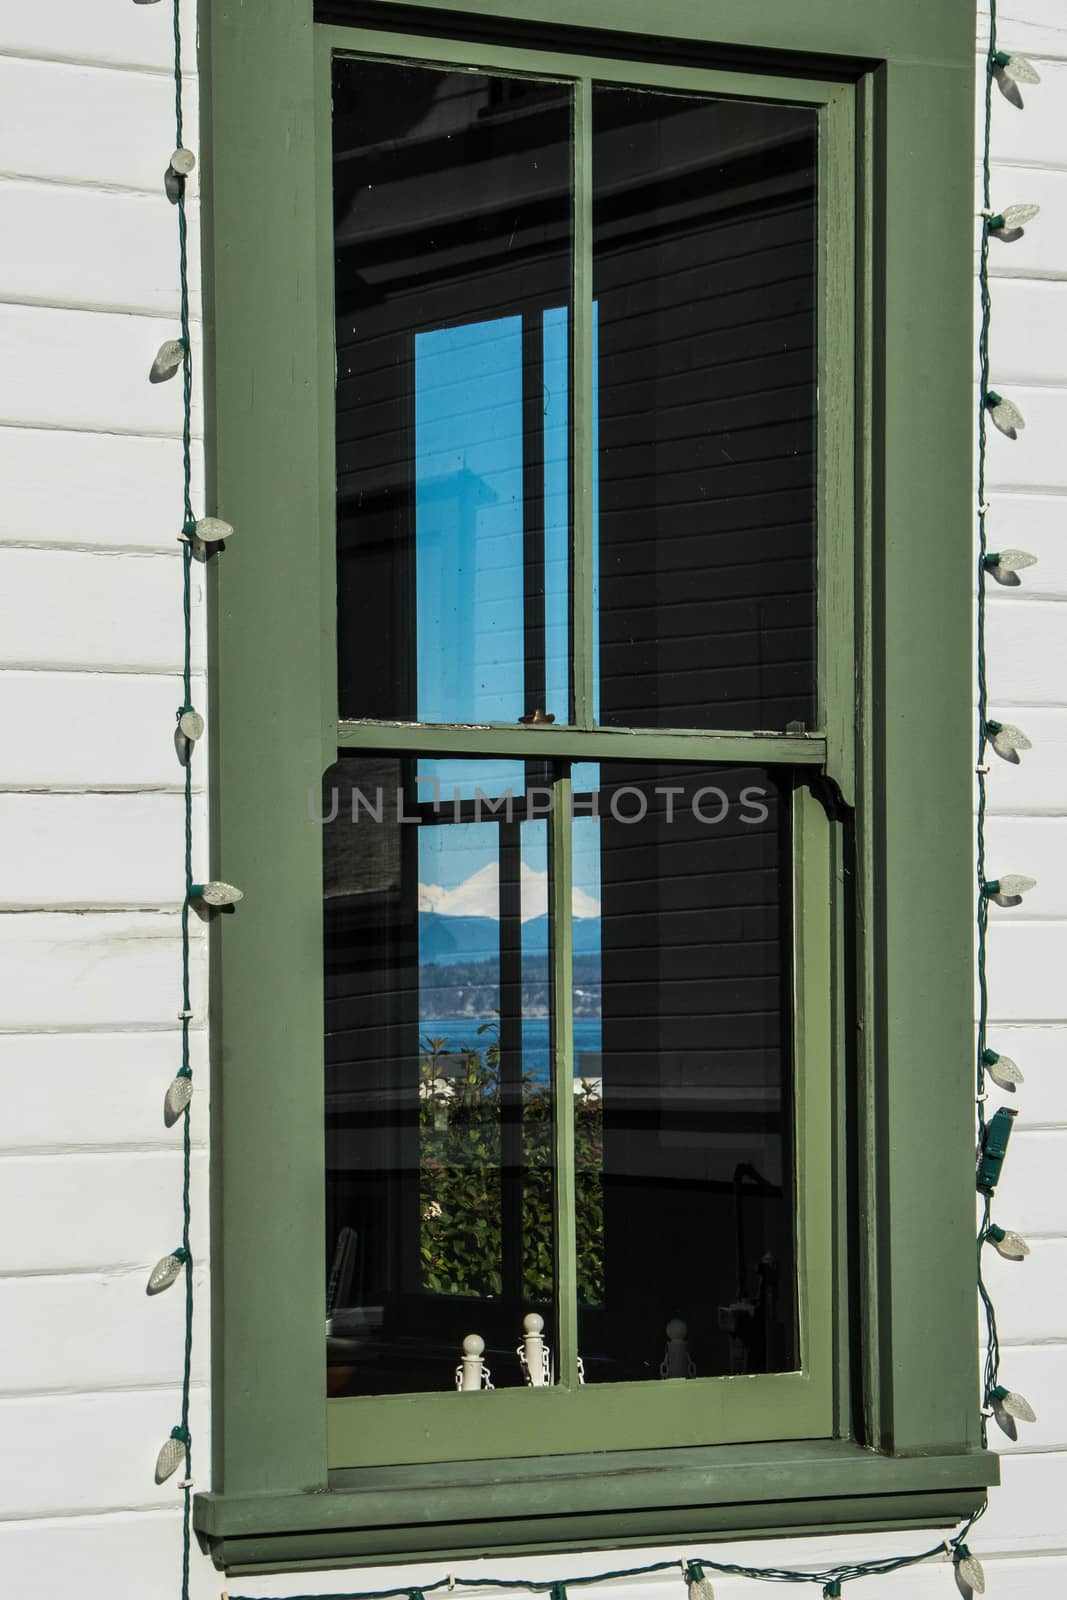 Windows in lighthouse keeper's shed by cestes001